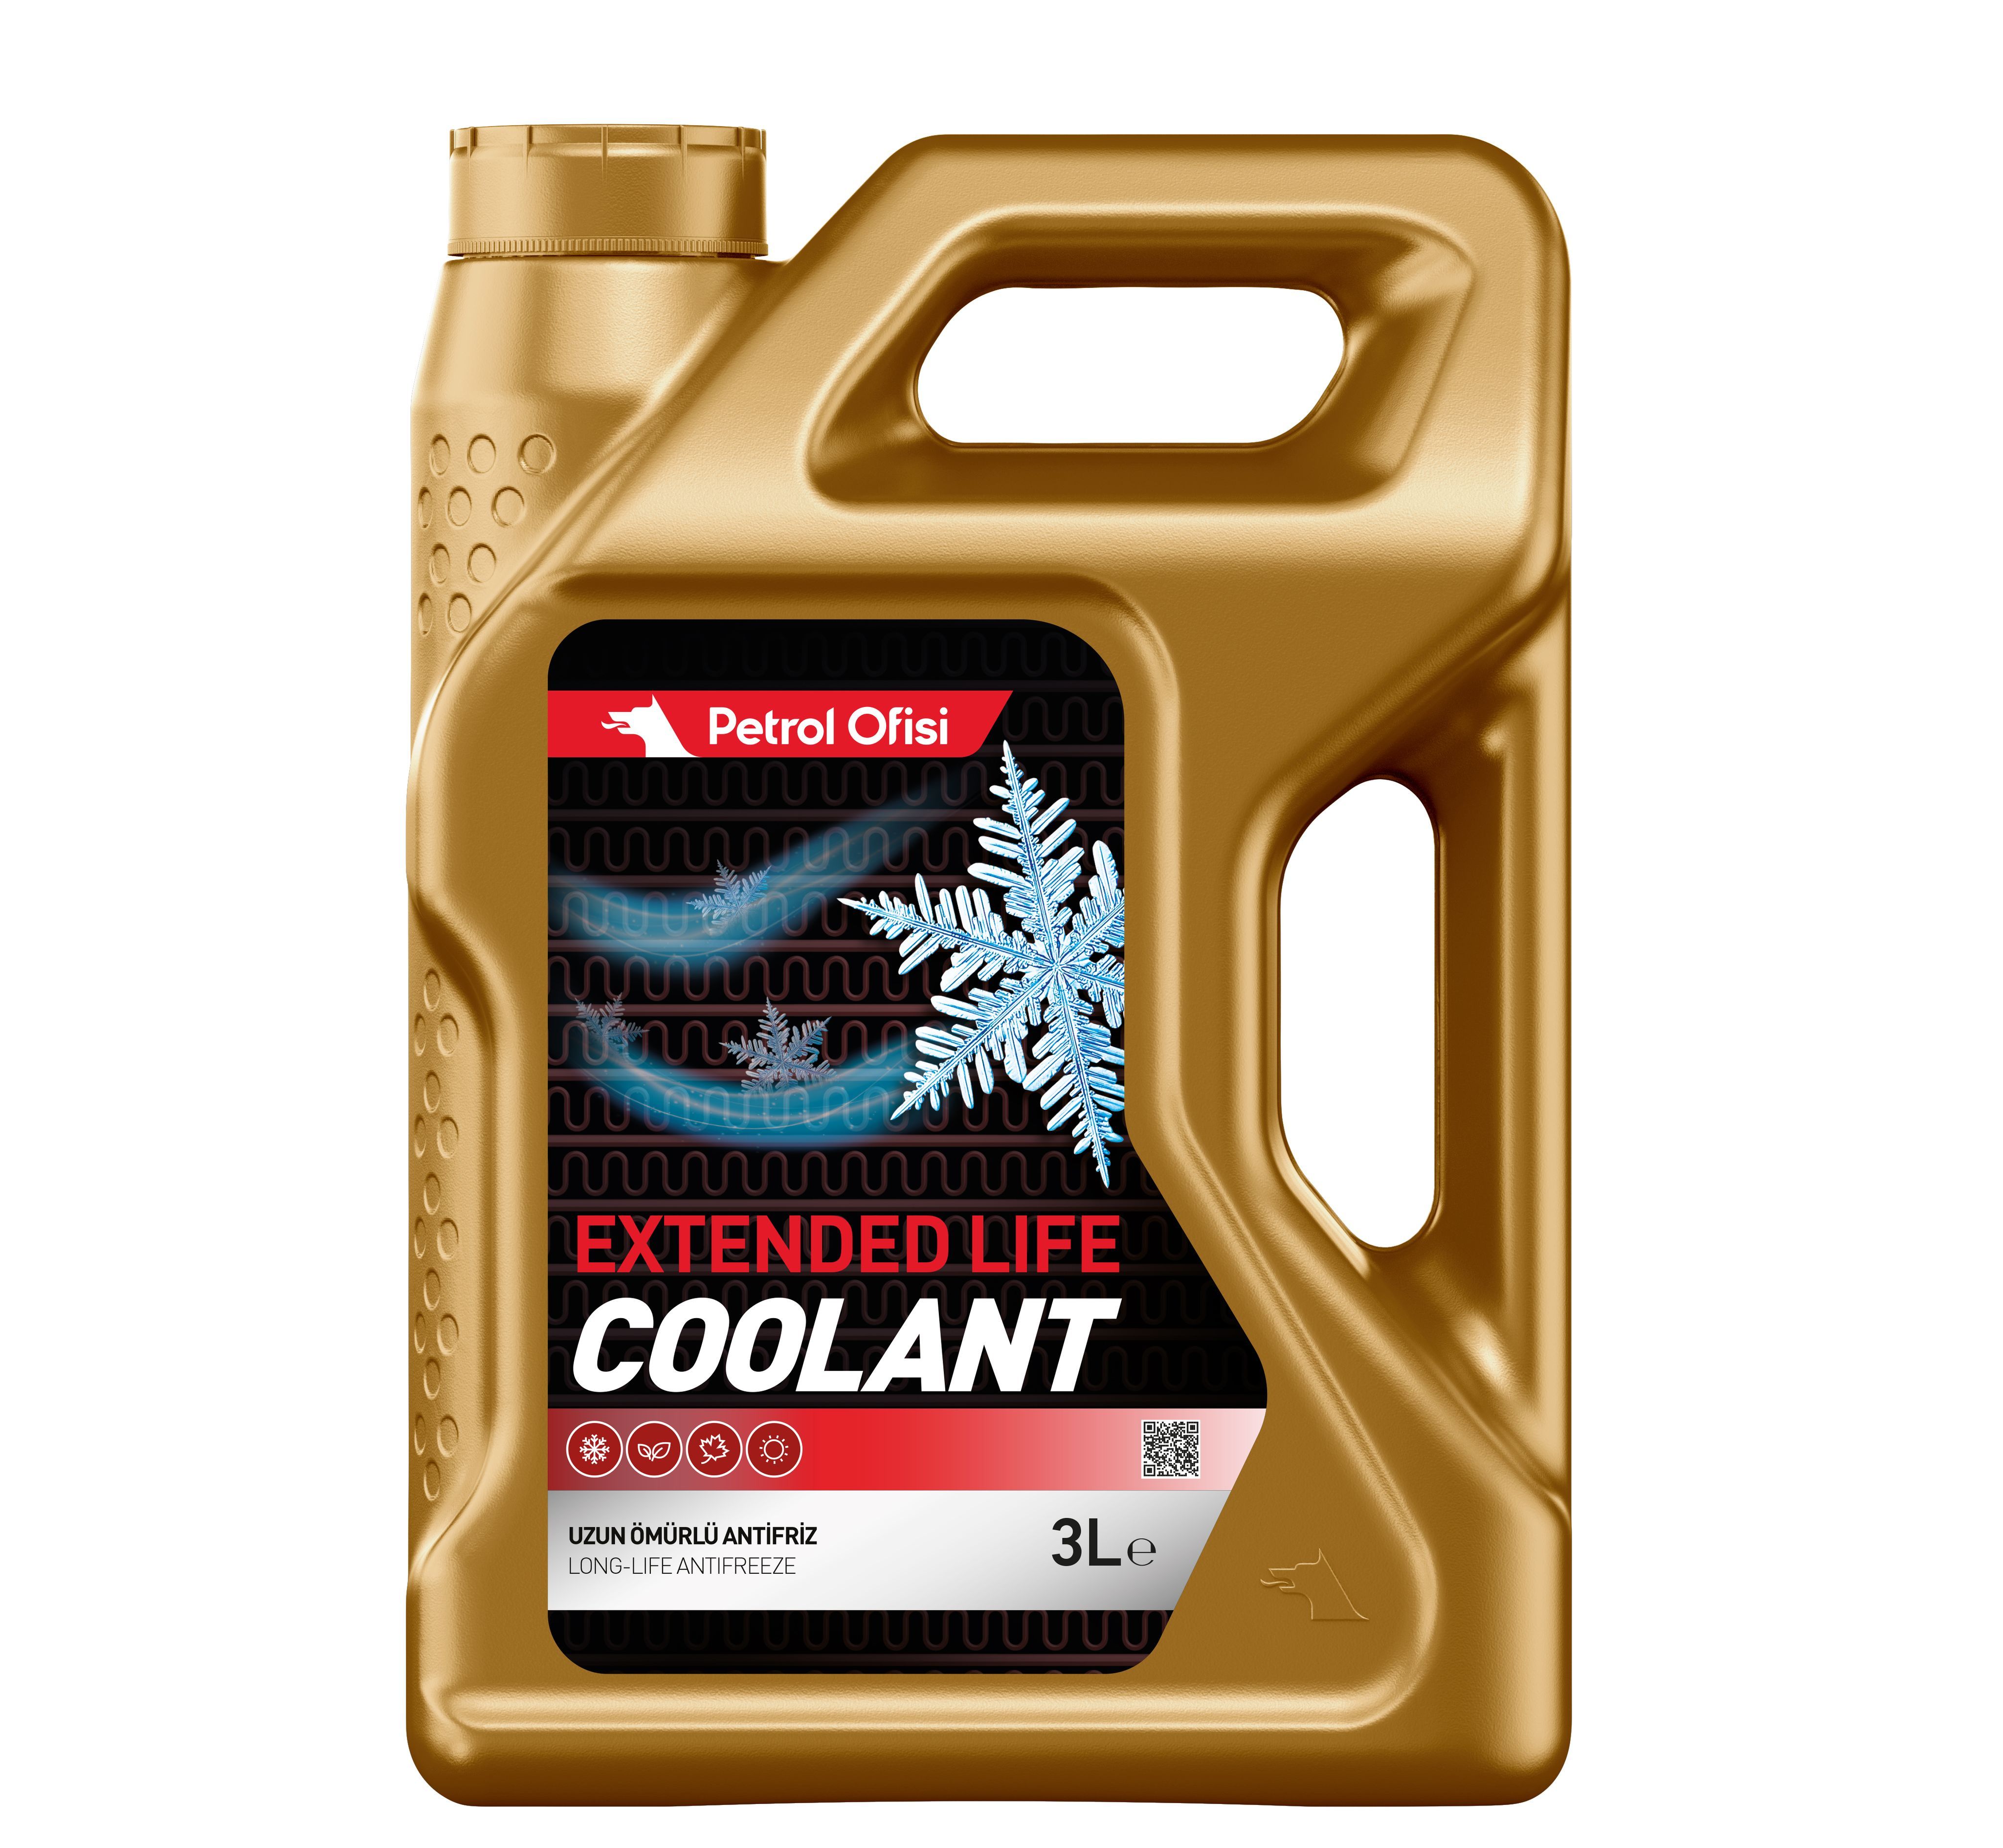 Extended life coolant. Mitsubishi Longlife Coolant цвет. Mitsubishi Longlife Coolant. Petrol products.